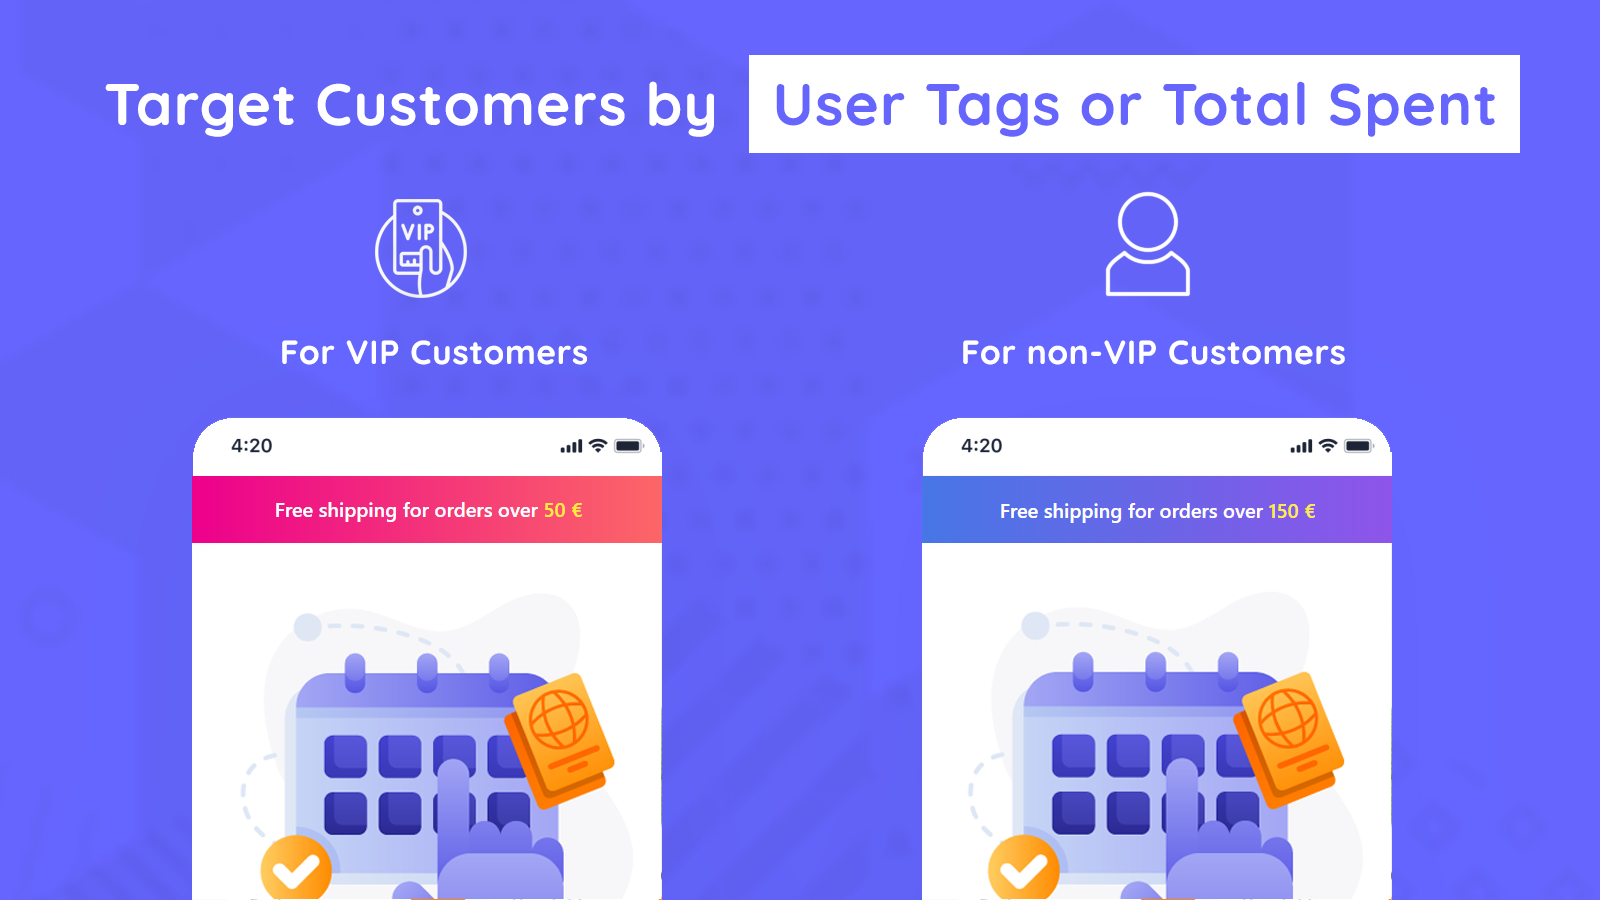 Target Customers by User Tags or Total Spent